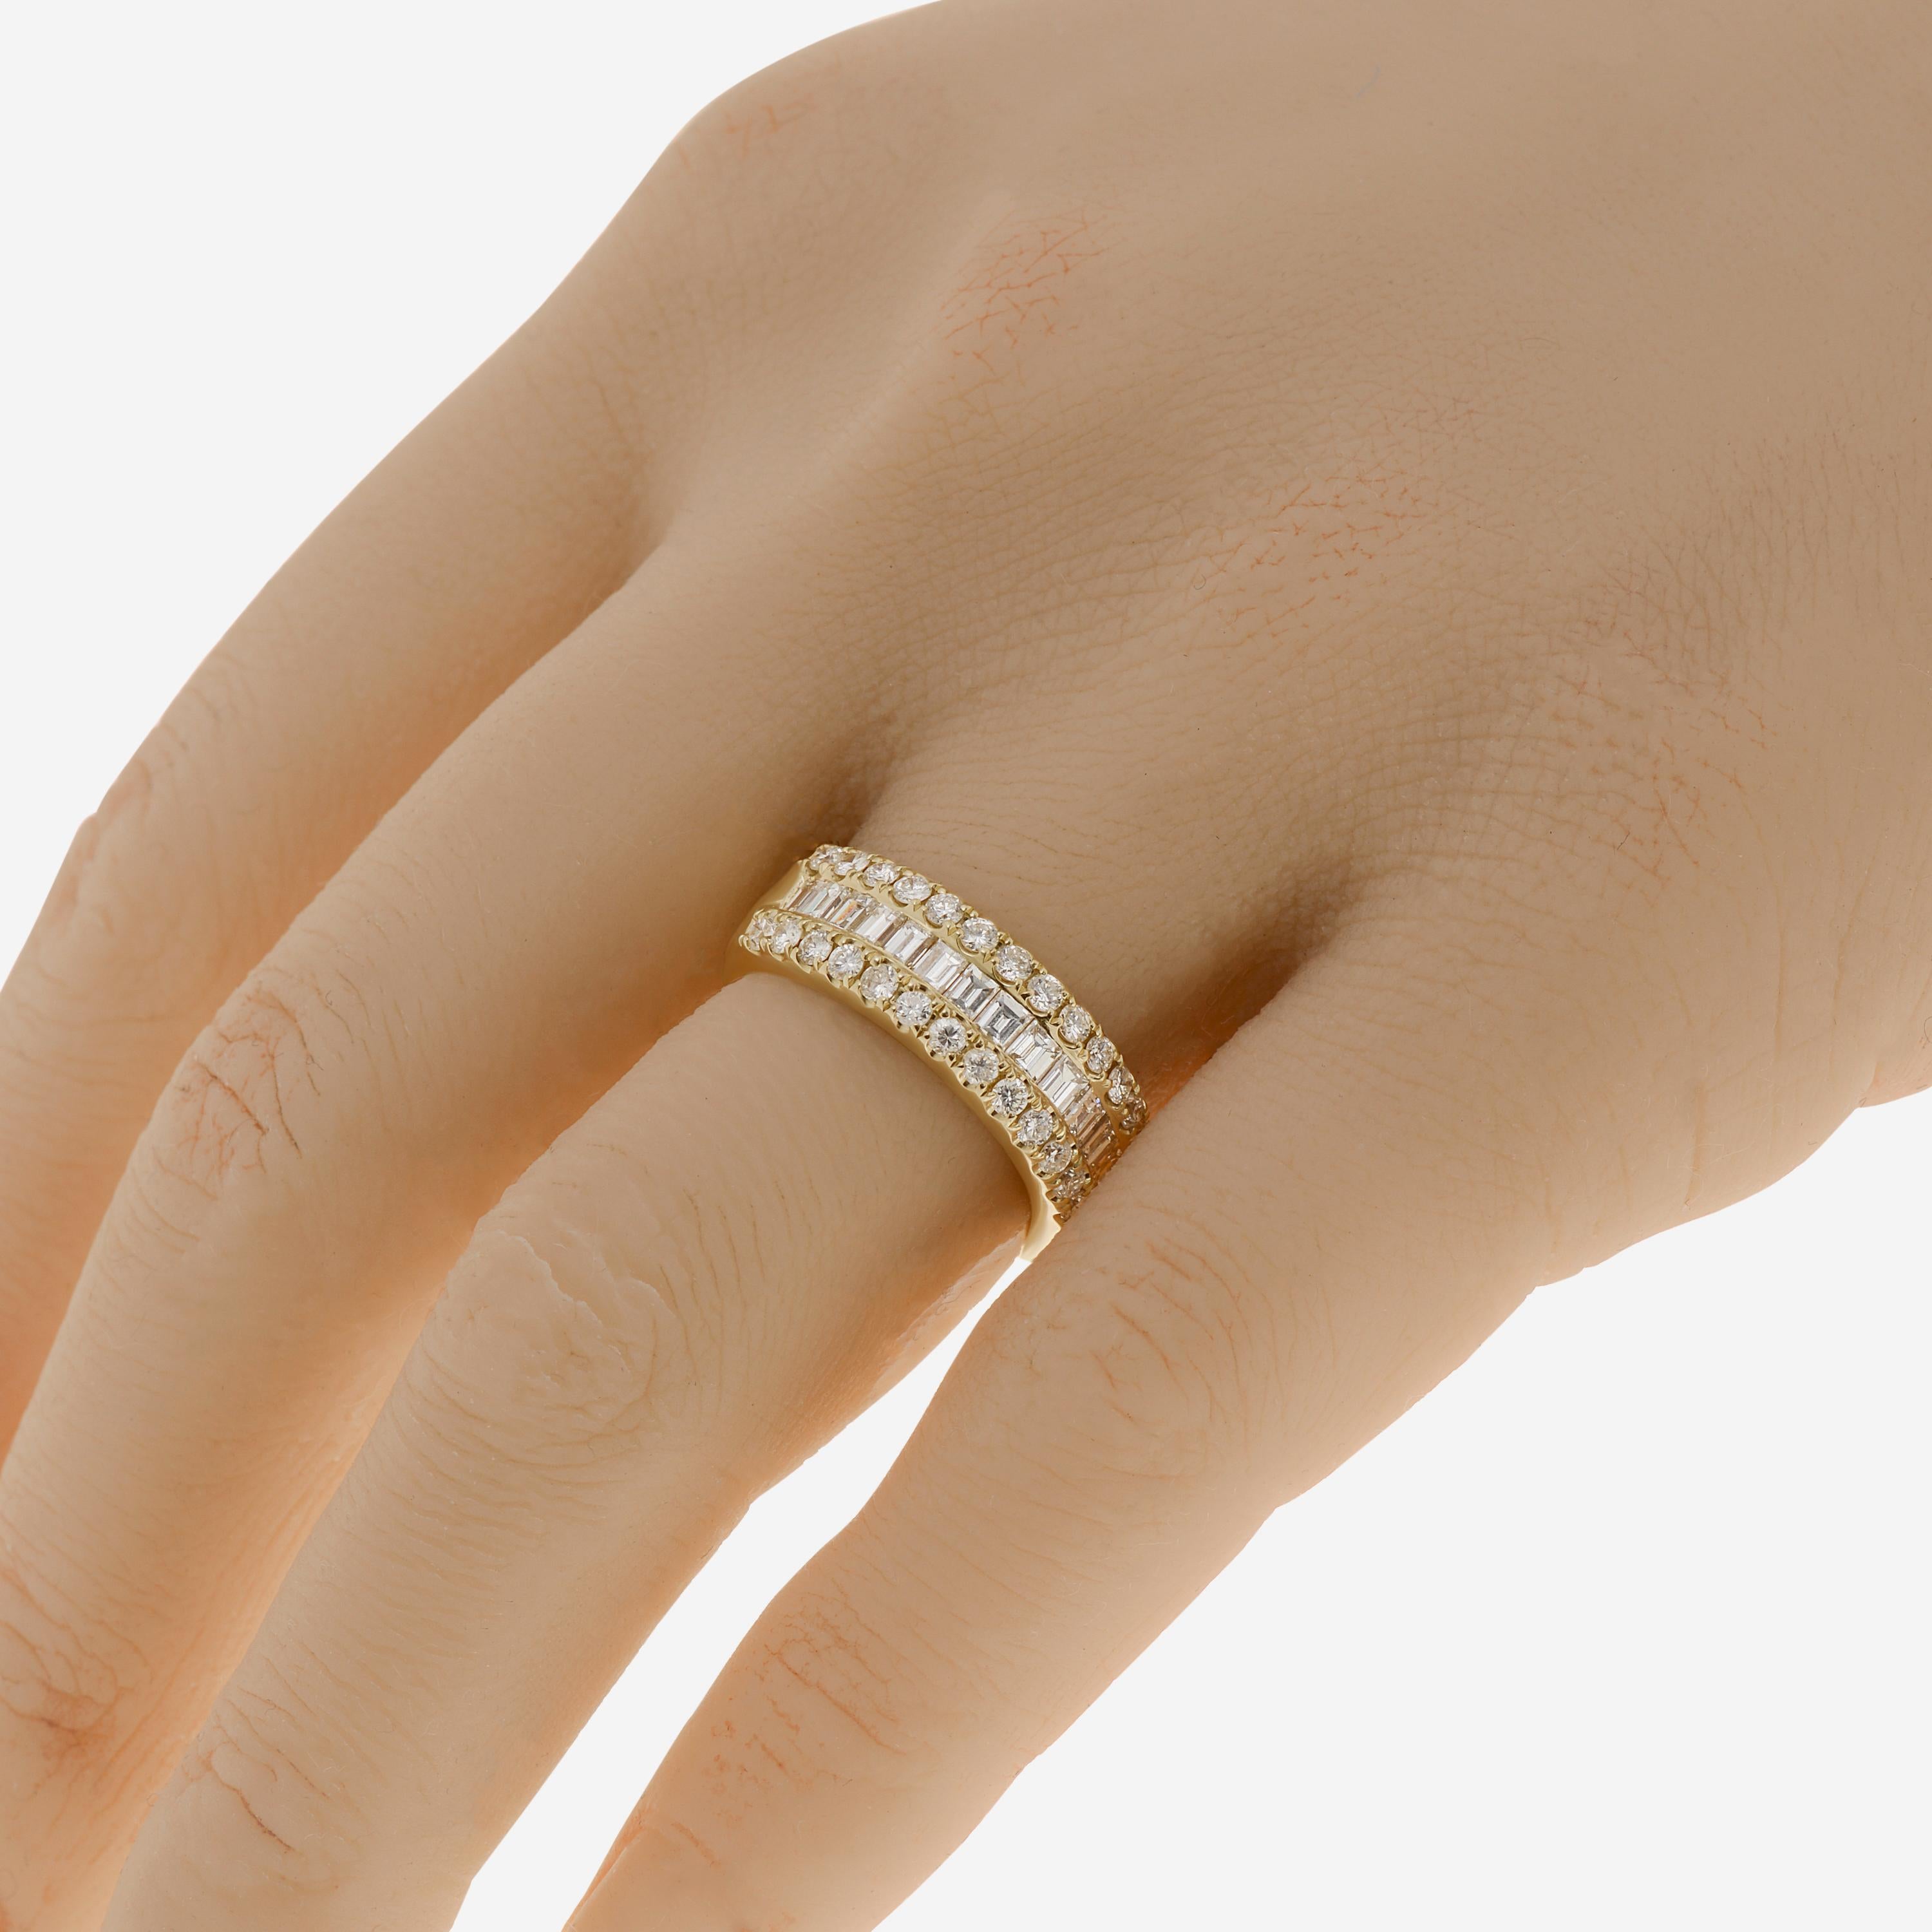 Tresorra 18k yellow gold band ring features 1.54ct. tw. diamonds with a color G-H and clarity SI1. The ring size is 6.25 (52.6). The total weight is 7.7g.
